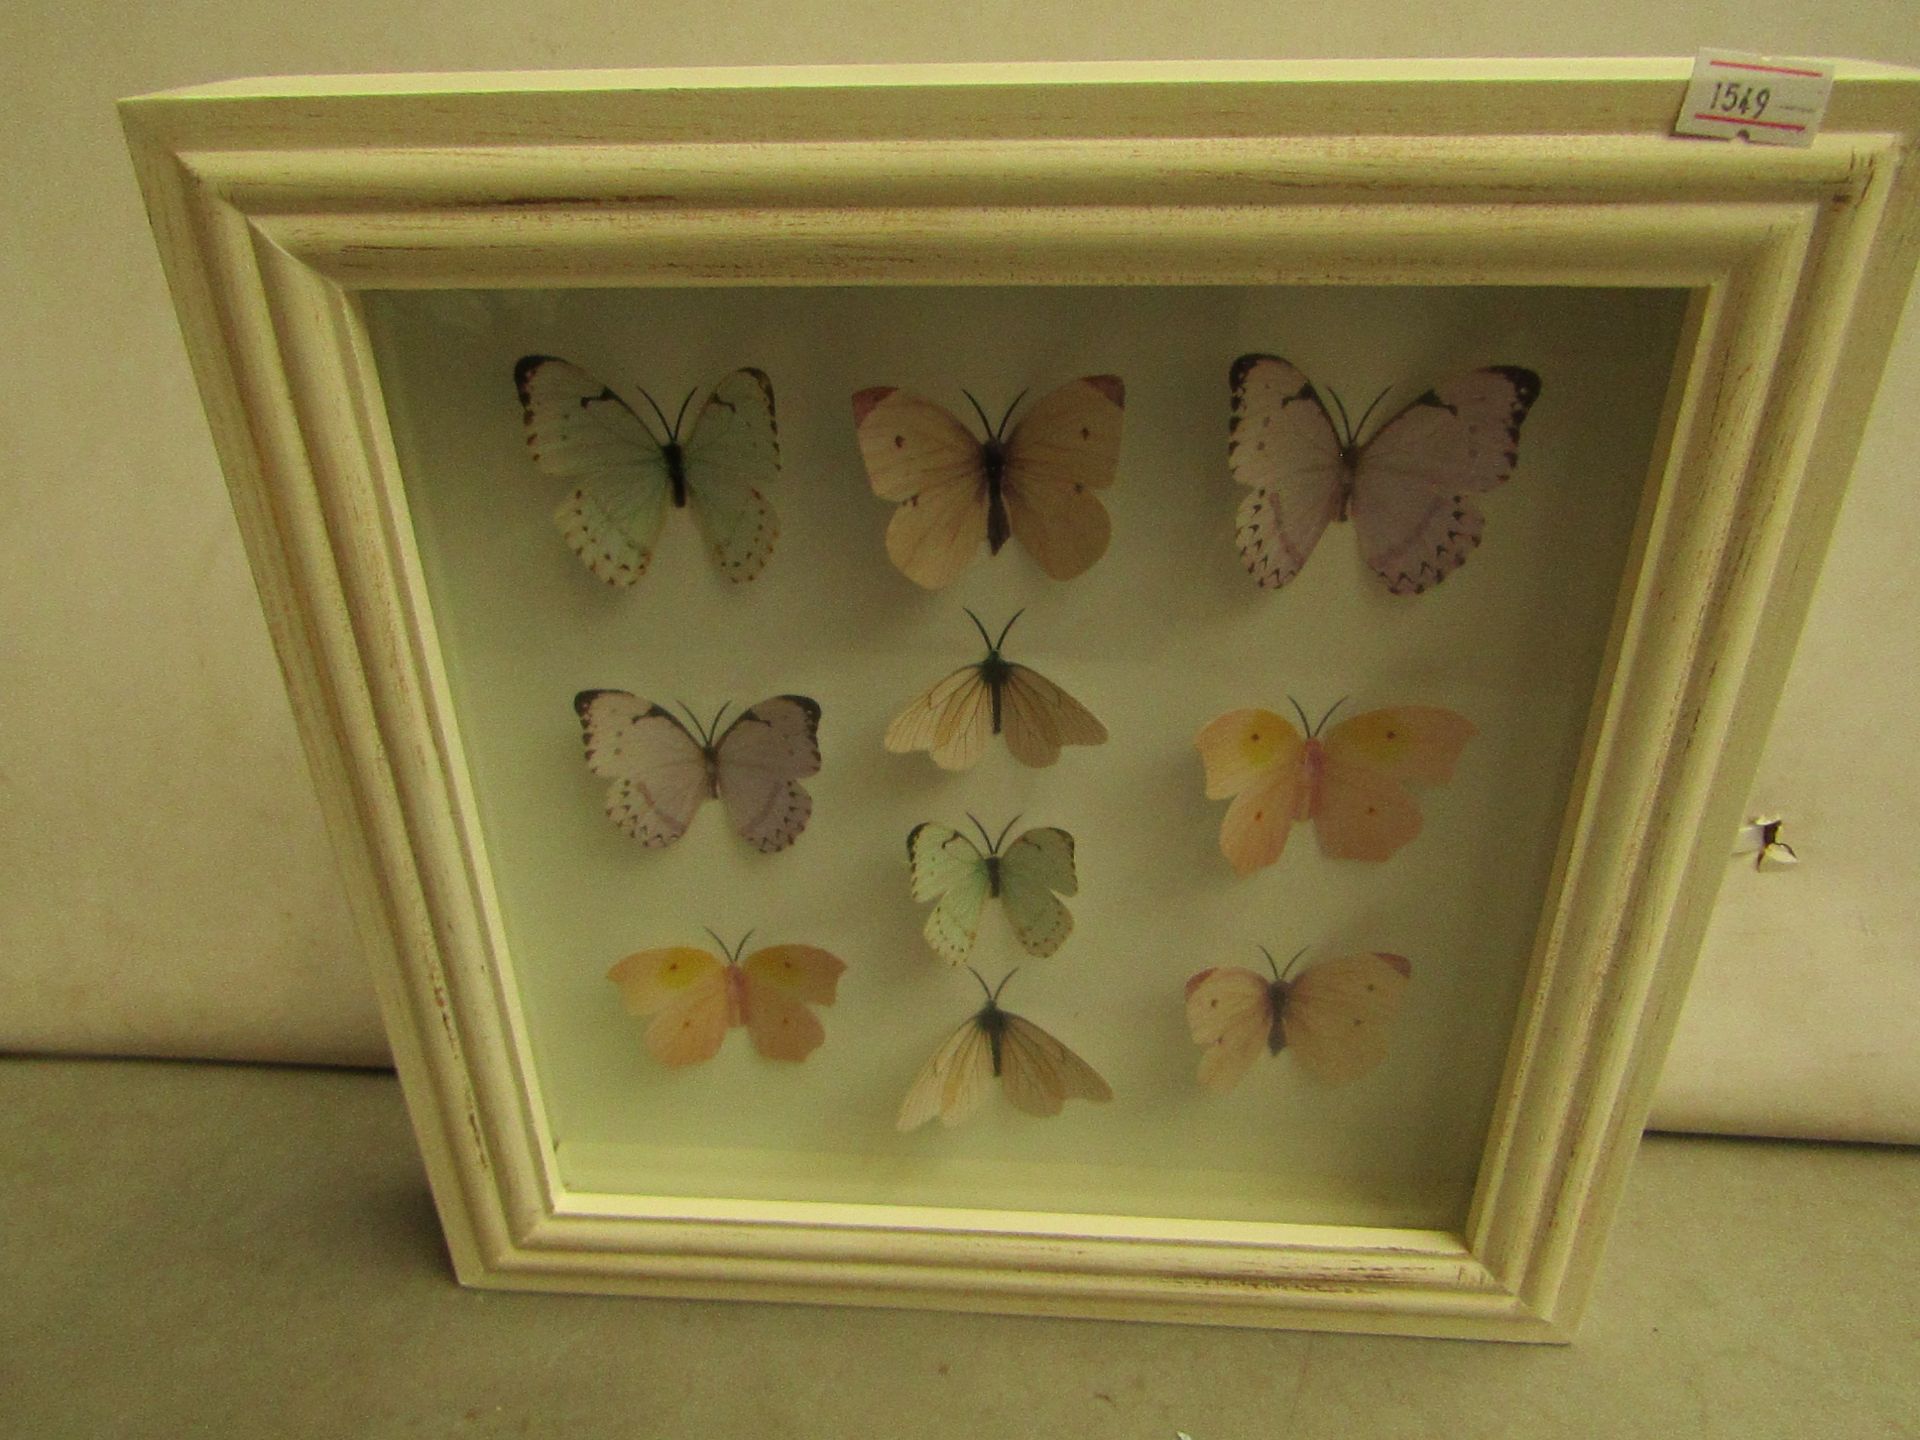 Butterfly Picture - 30cmx30cm - Good Condition.